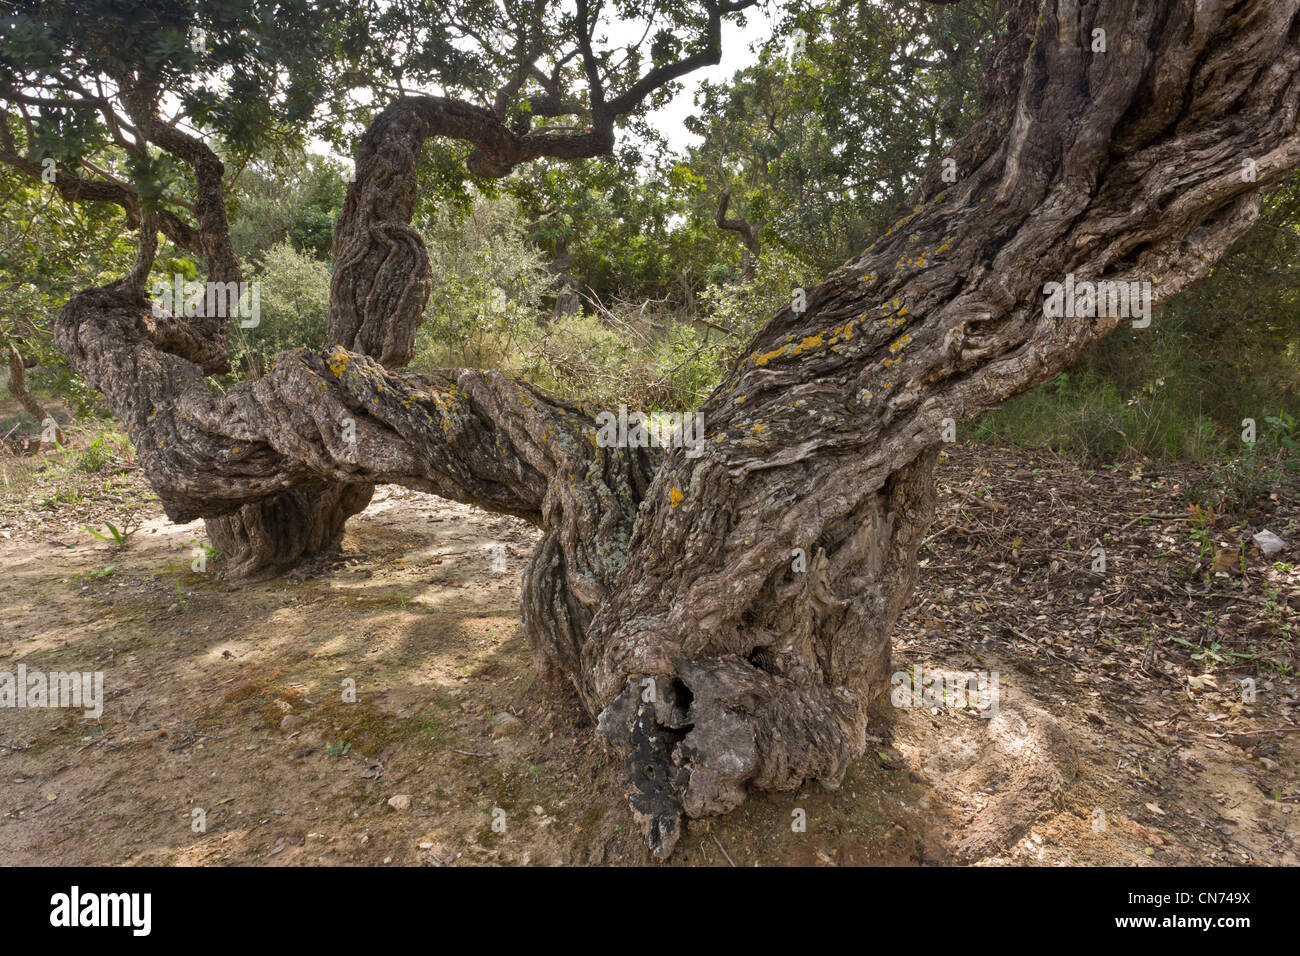 Ancient Mastic trees, Pistacia lentiscus var chia in cultivation on the greek island of Chios, Greece. Stock Photo